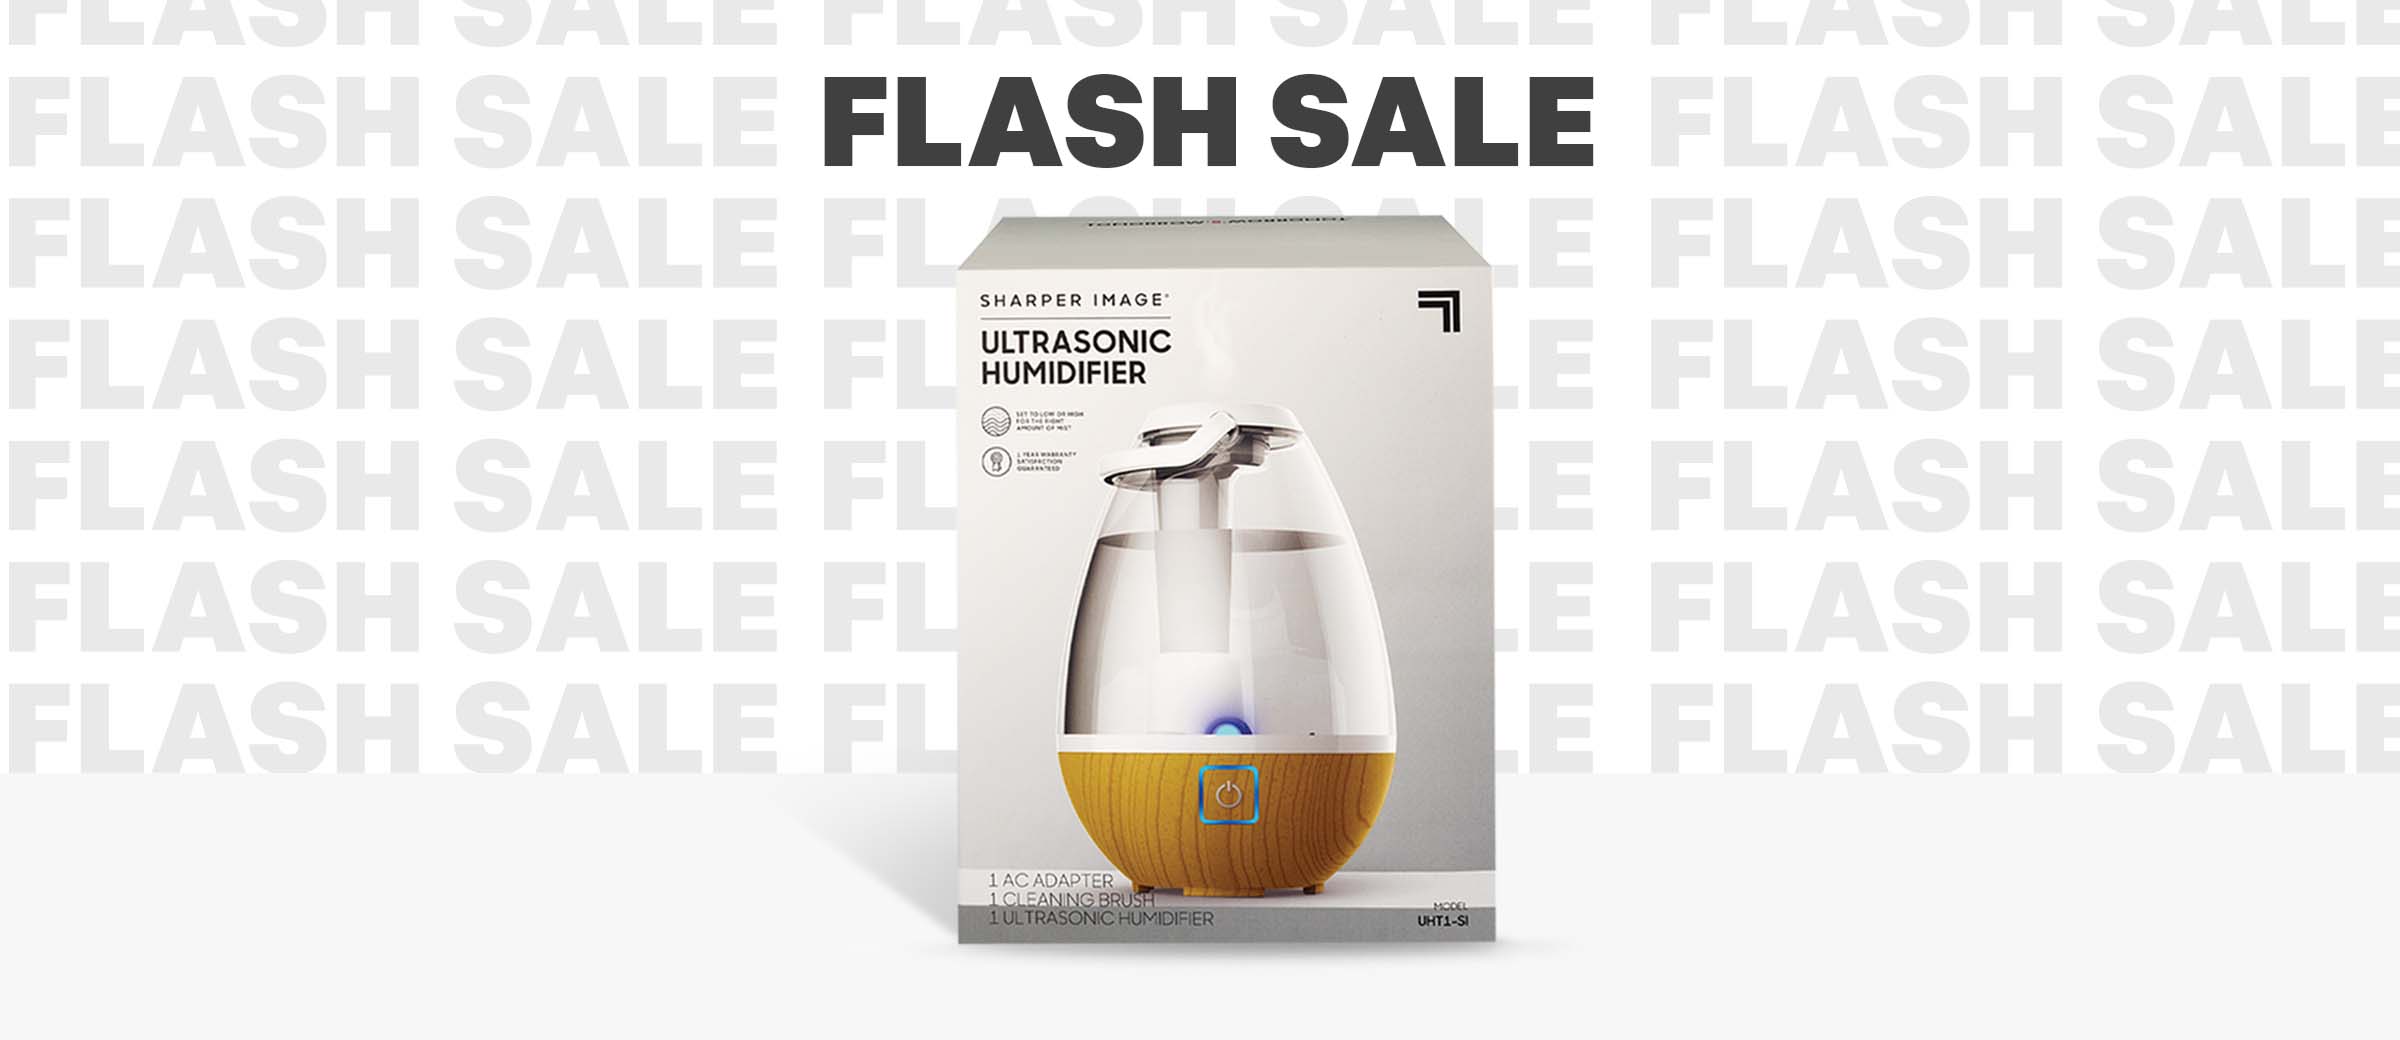 Flash sale on Sharper Image products, Ultrasonic Humidifier shown